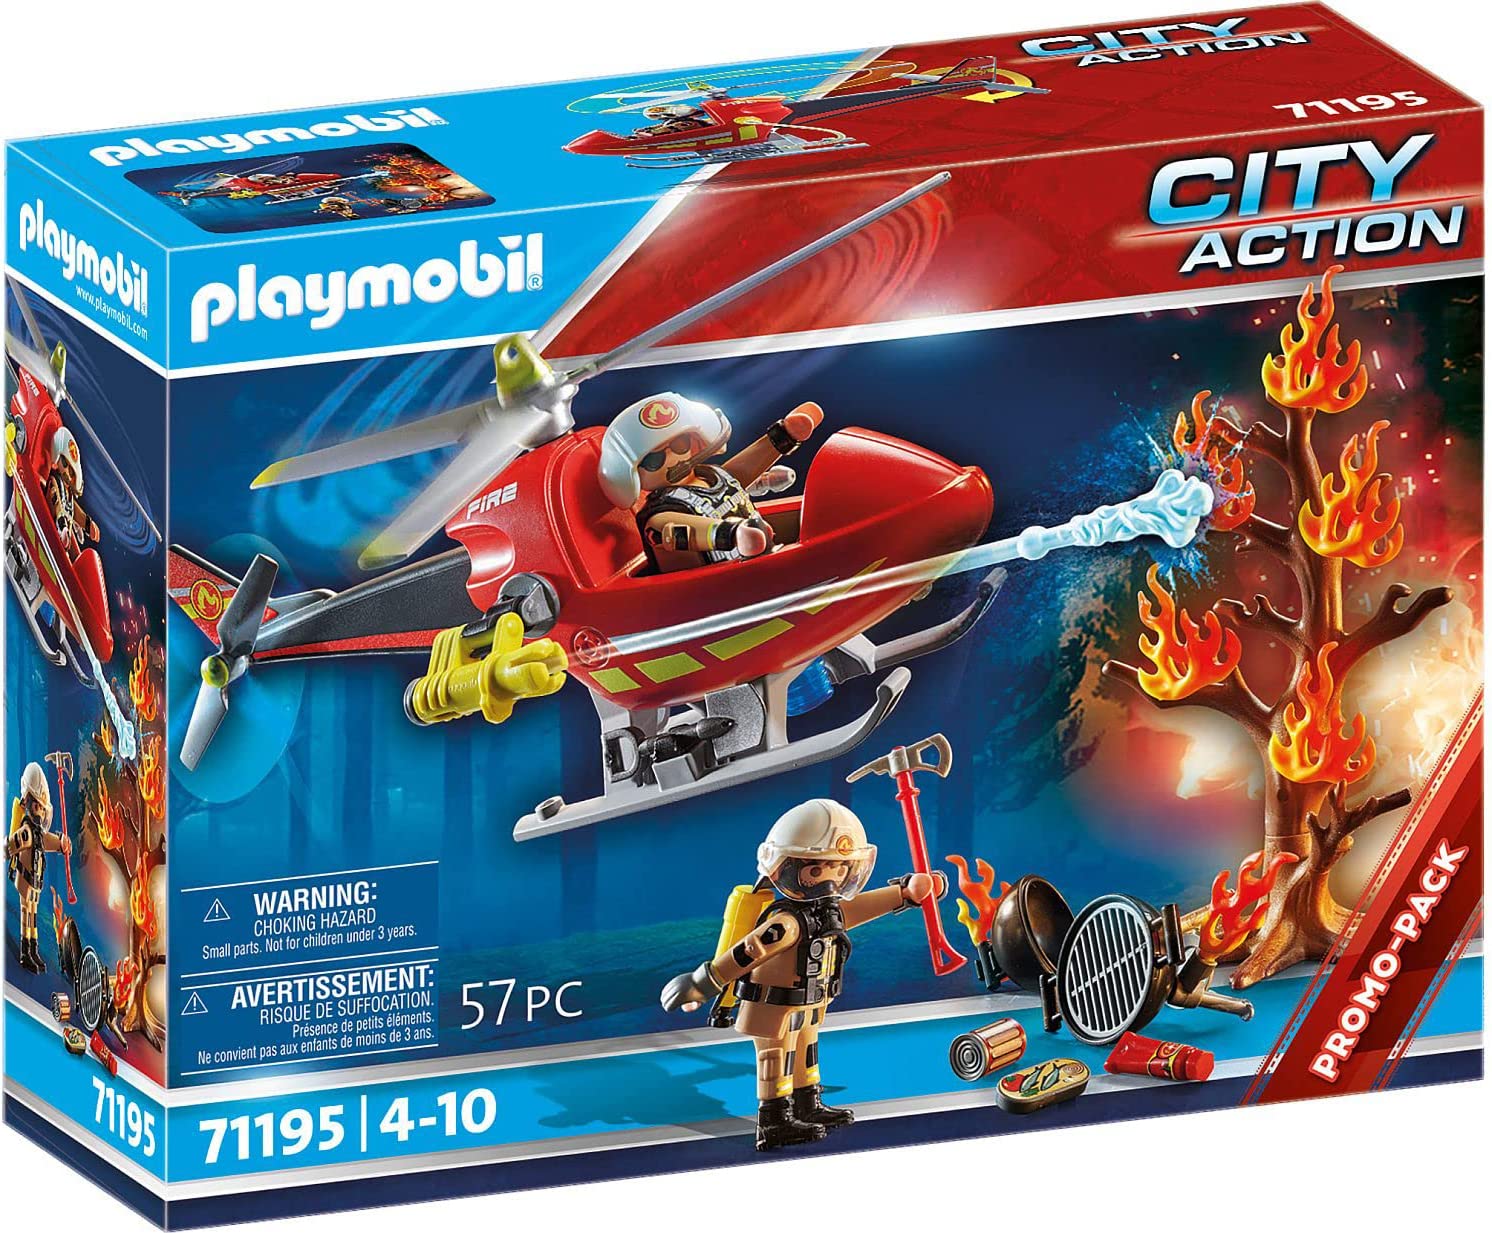 PLAYMOBIL City Action 71195 Fire Engine Helicopter, Fire Engine Helicopter with Fire Cannon, Toy for Children from 4 Years